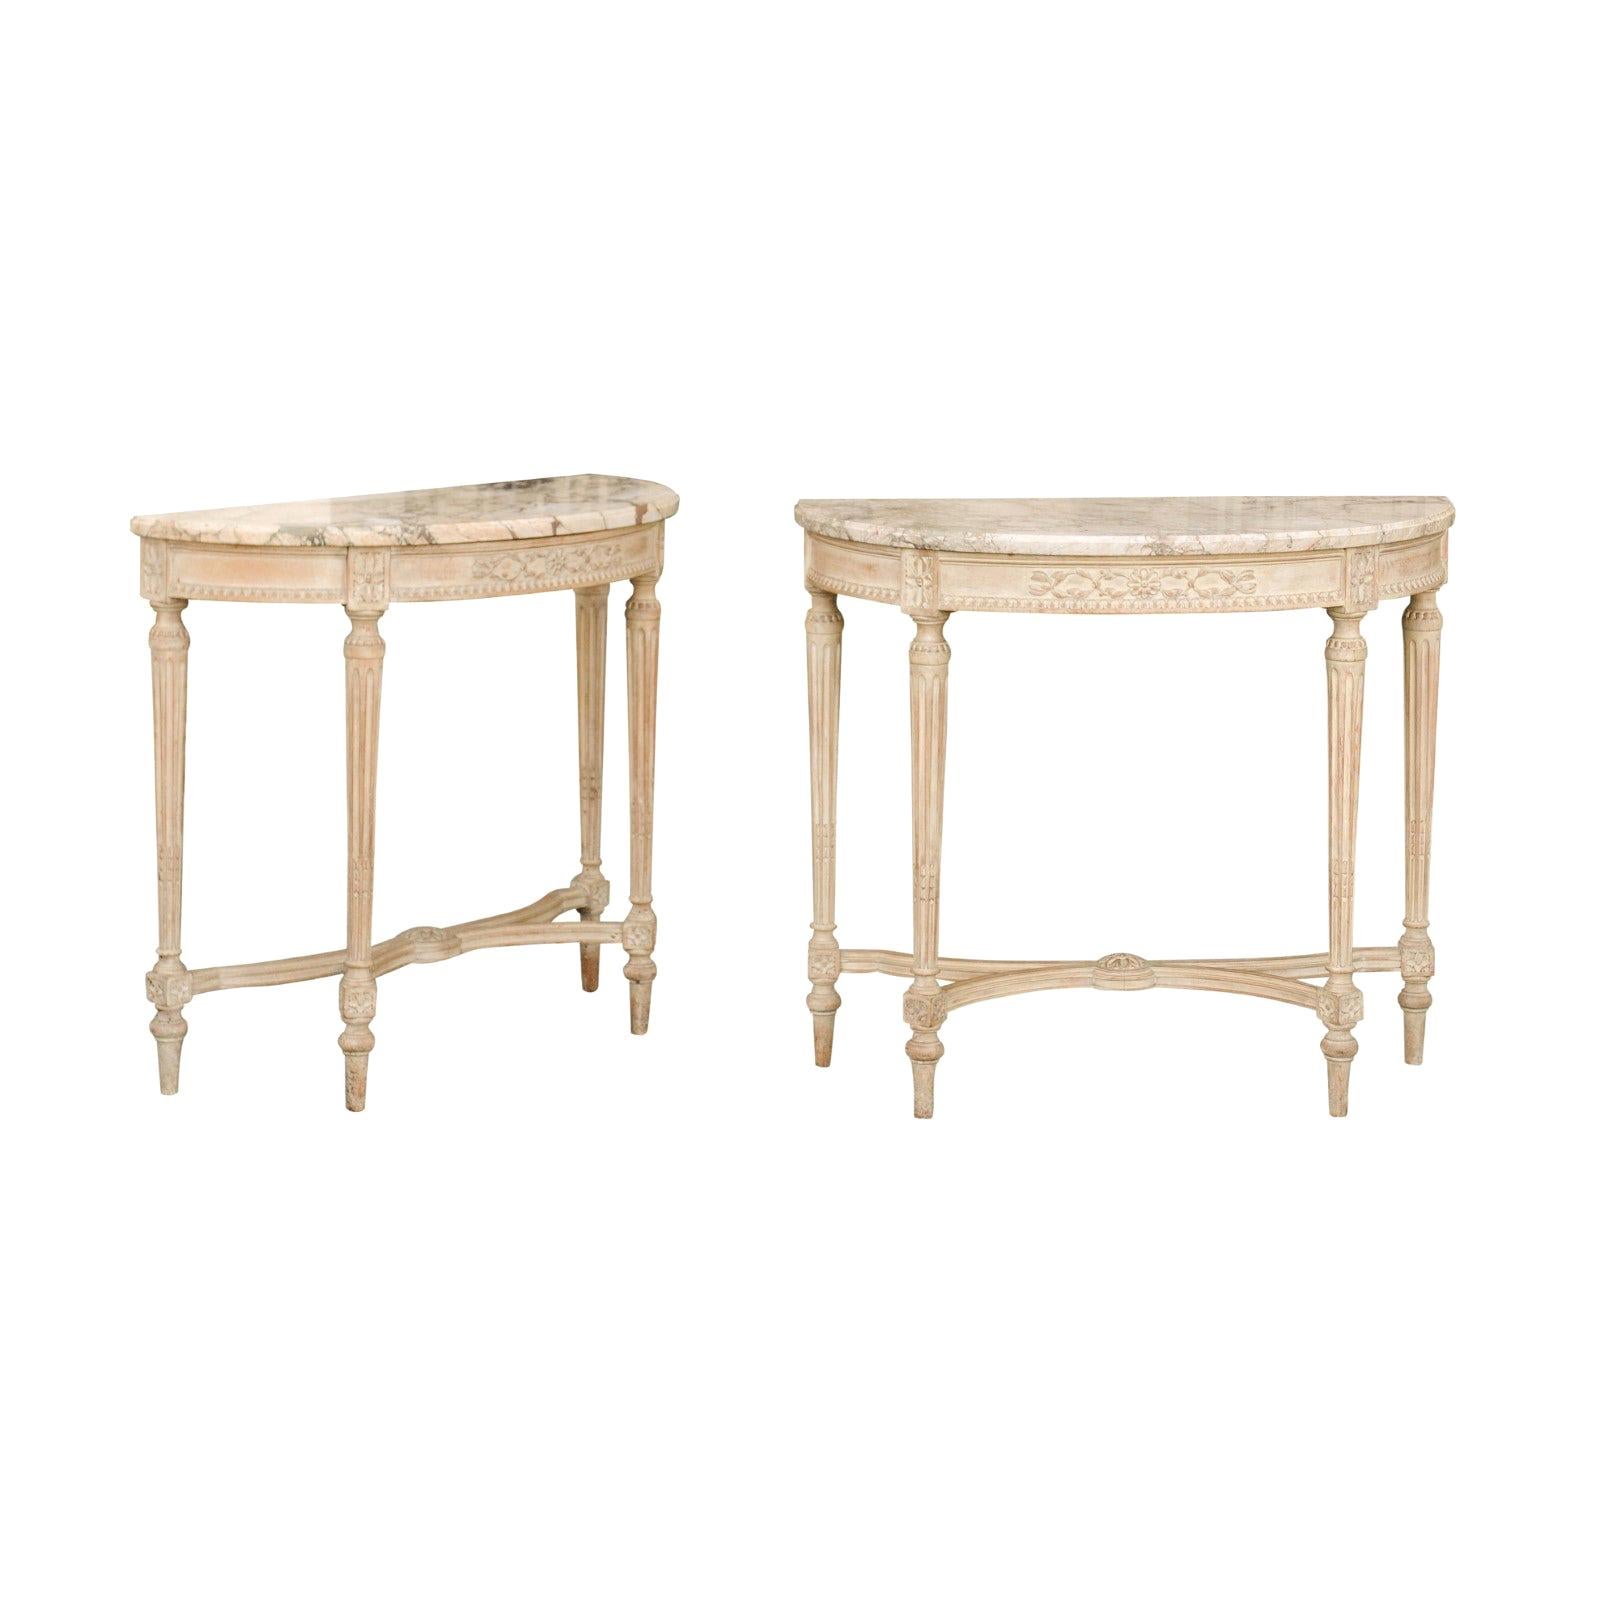 Pair of French Neoclassical Style Painted Demilunes with Marble Tops, circa 1900